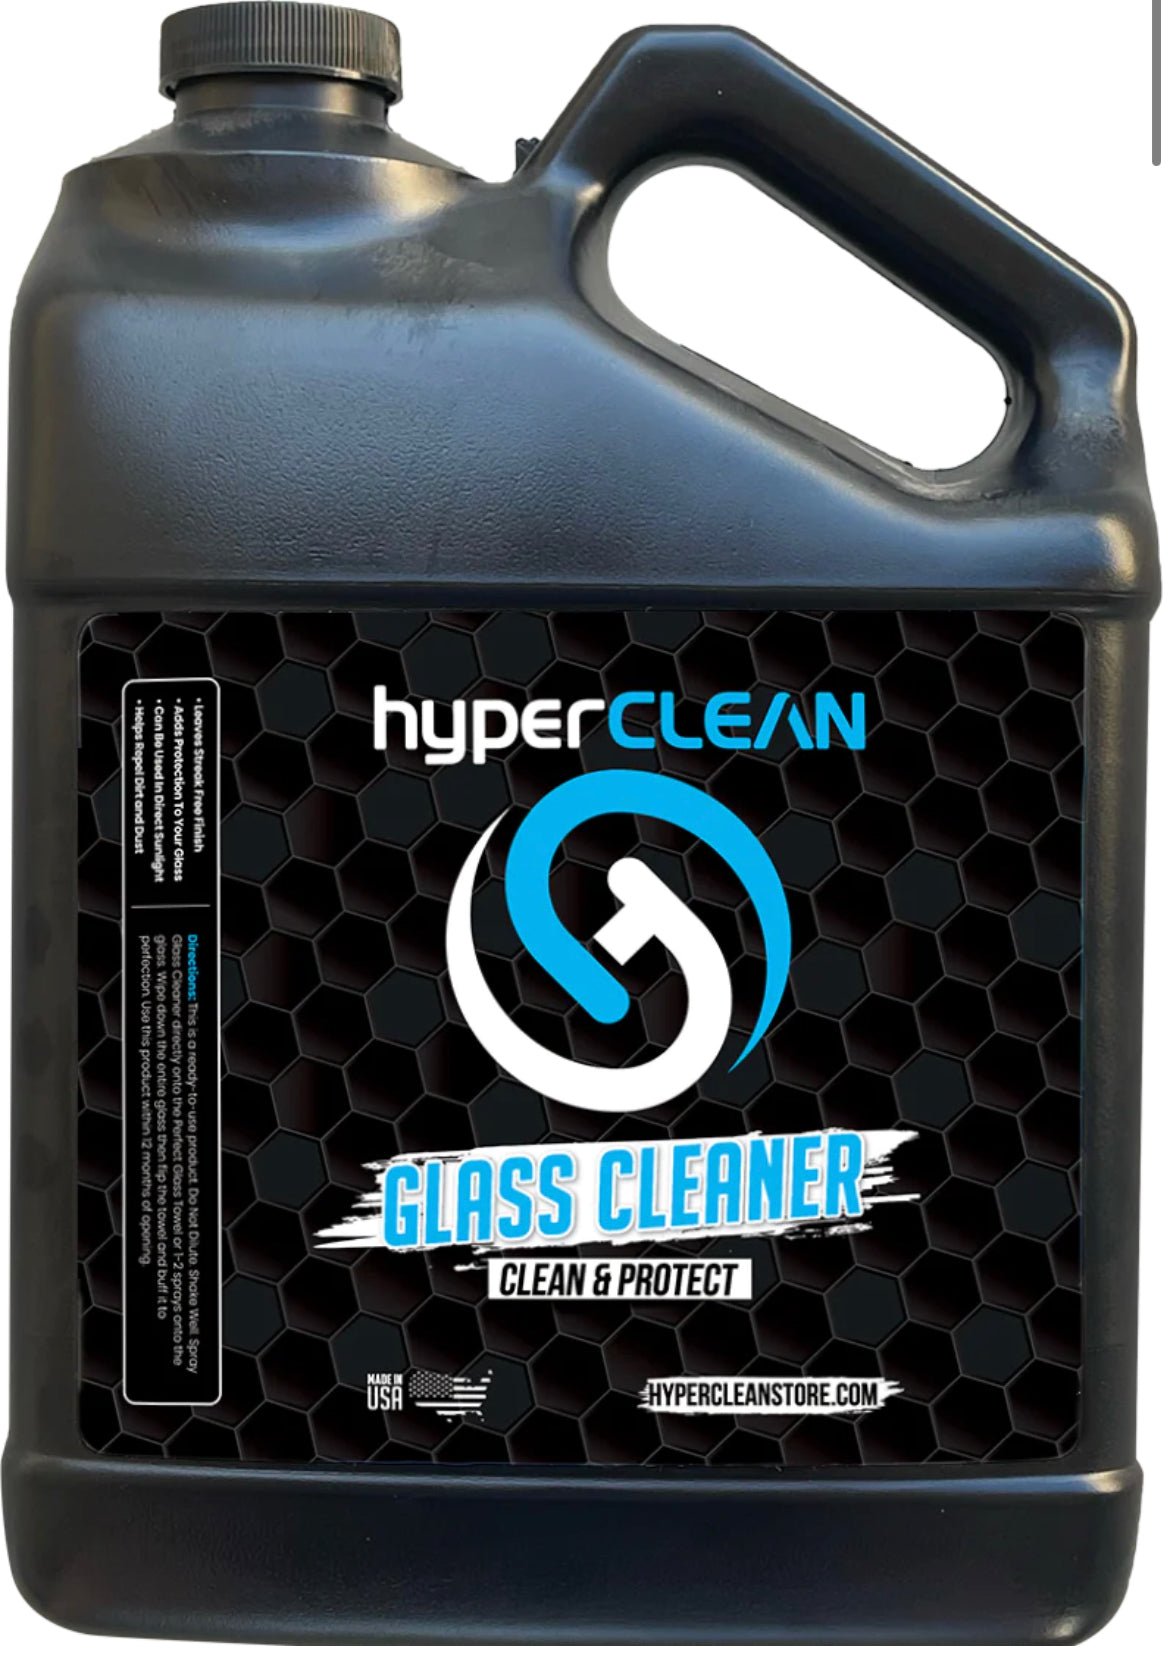 Glass Cleaner | Clean+Protect - Brothers Auto Perfection